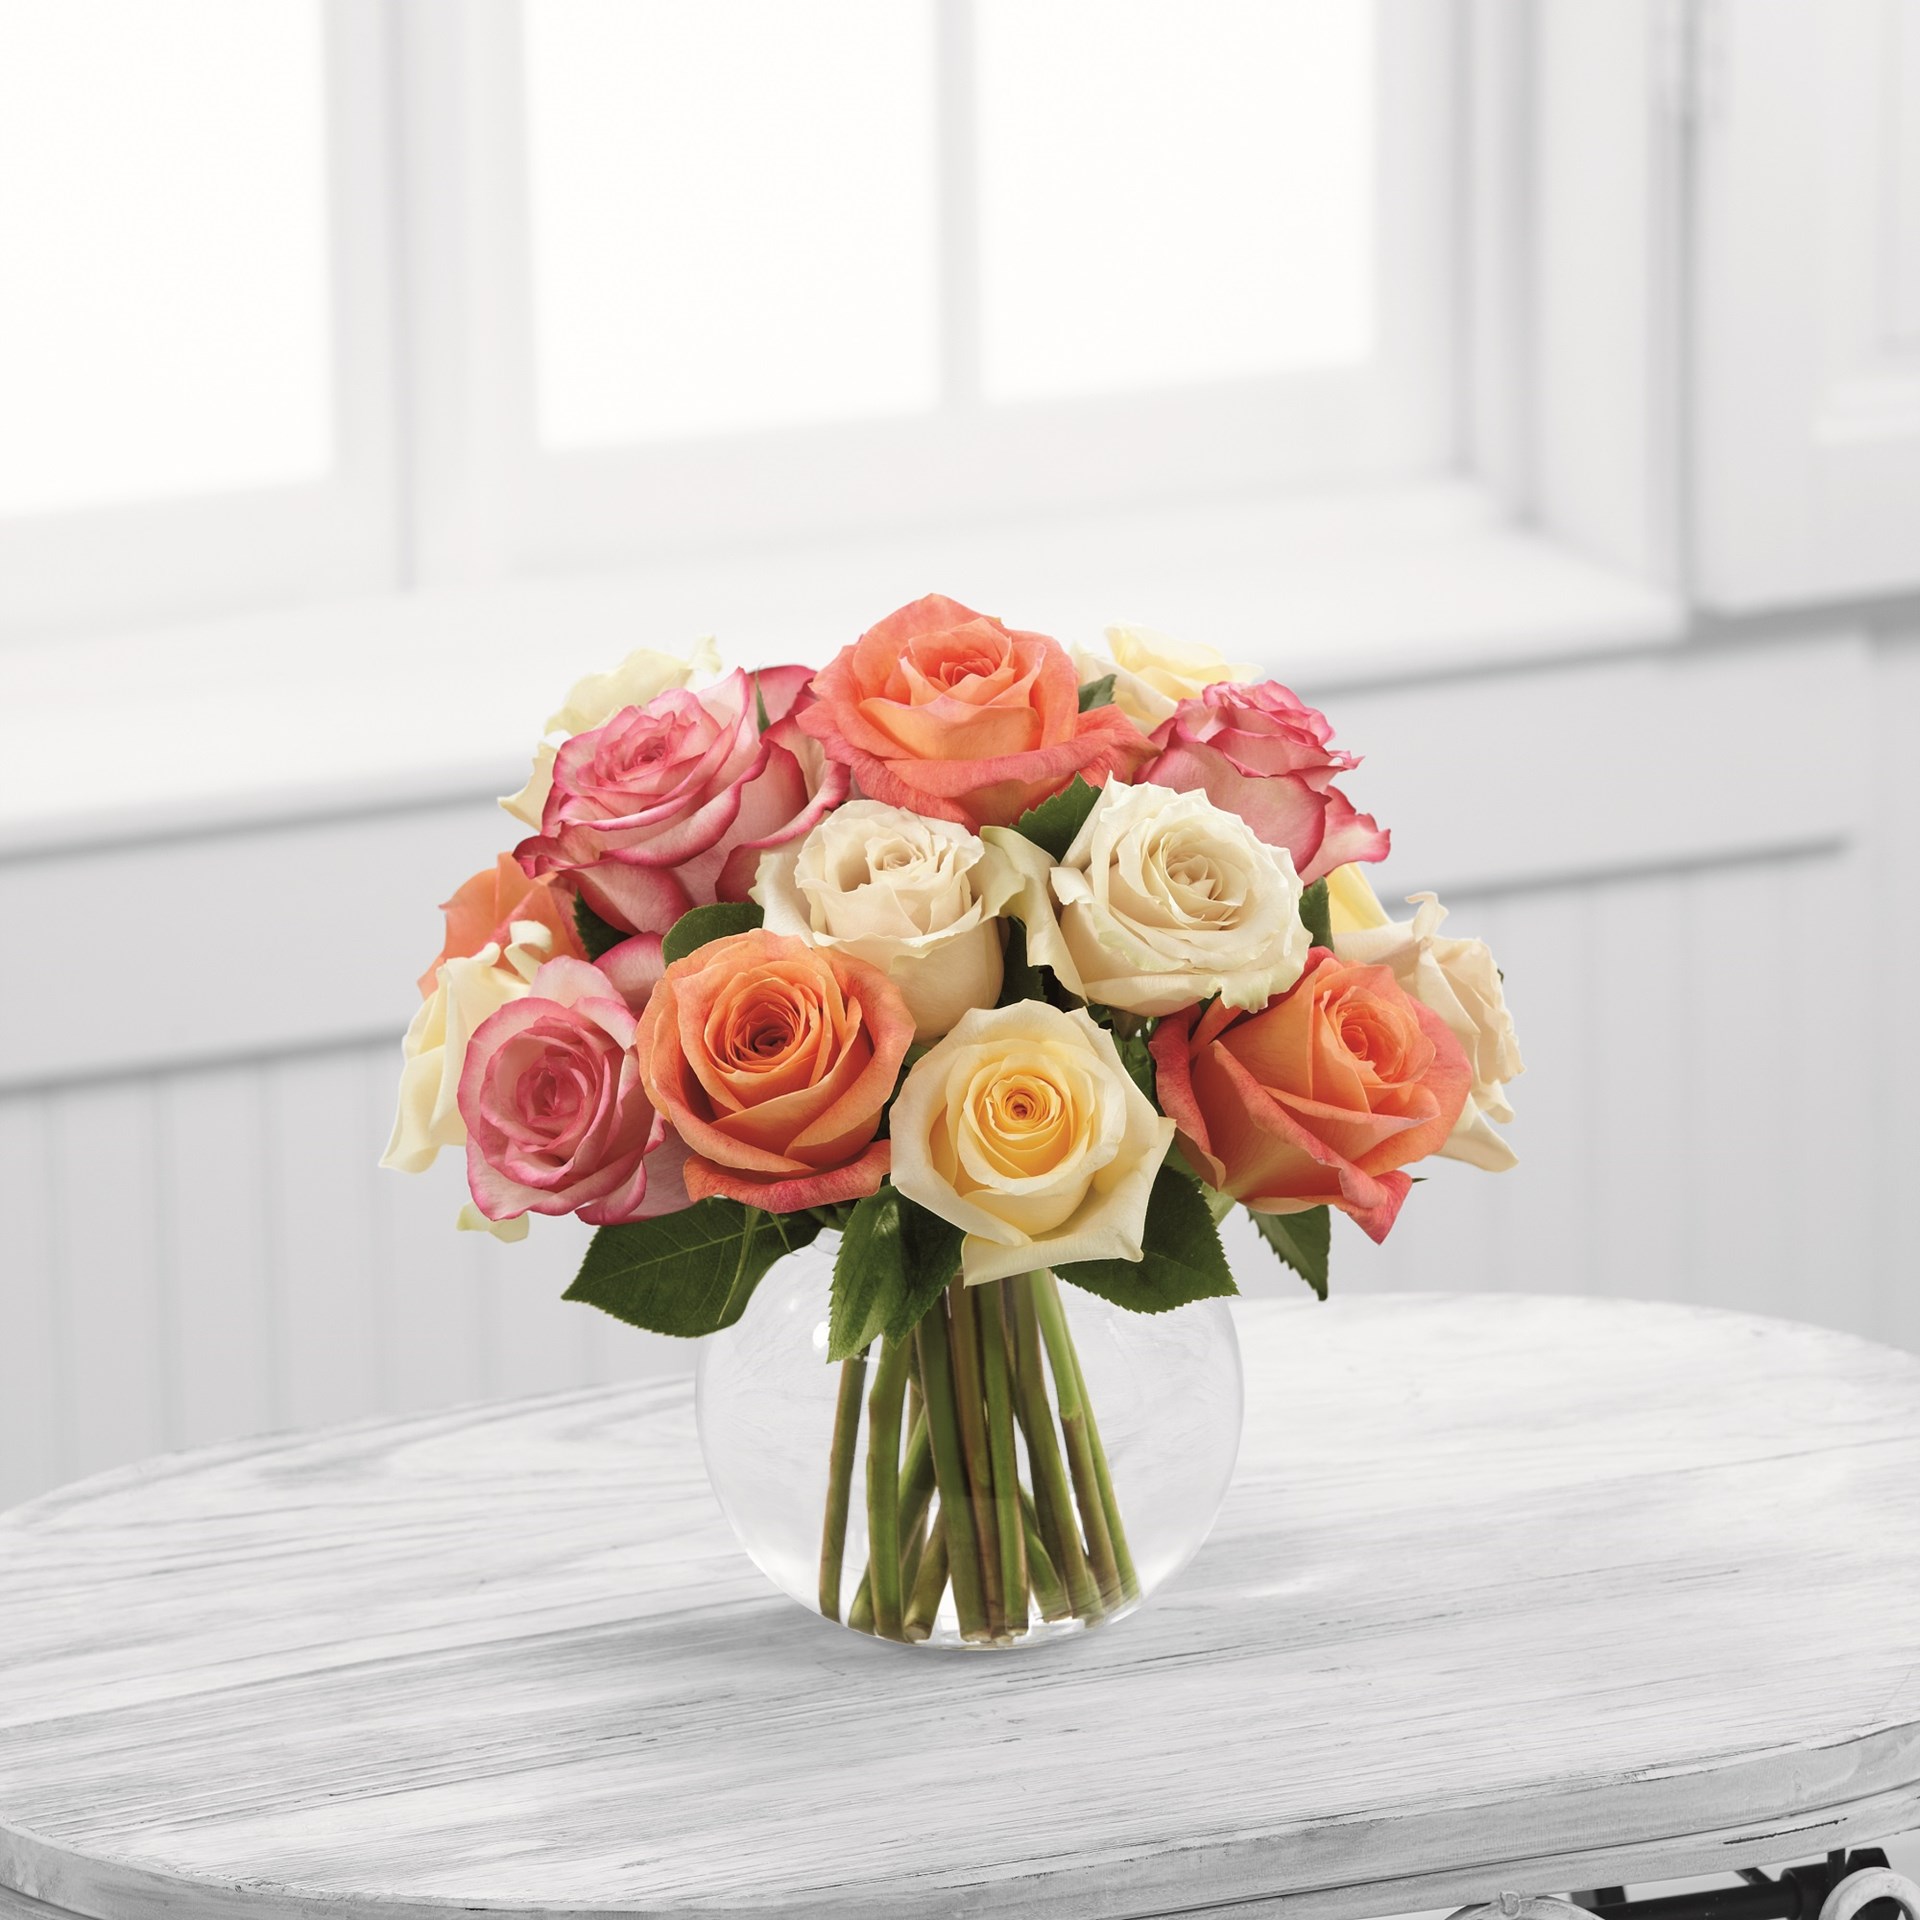 product image for The Sundance Rose Bouquet by FTD - VASE INCLUDED